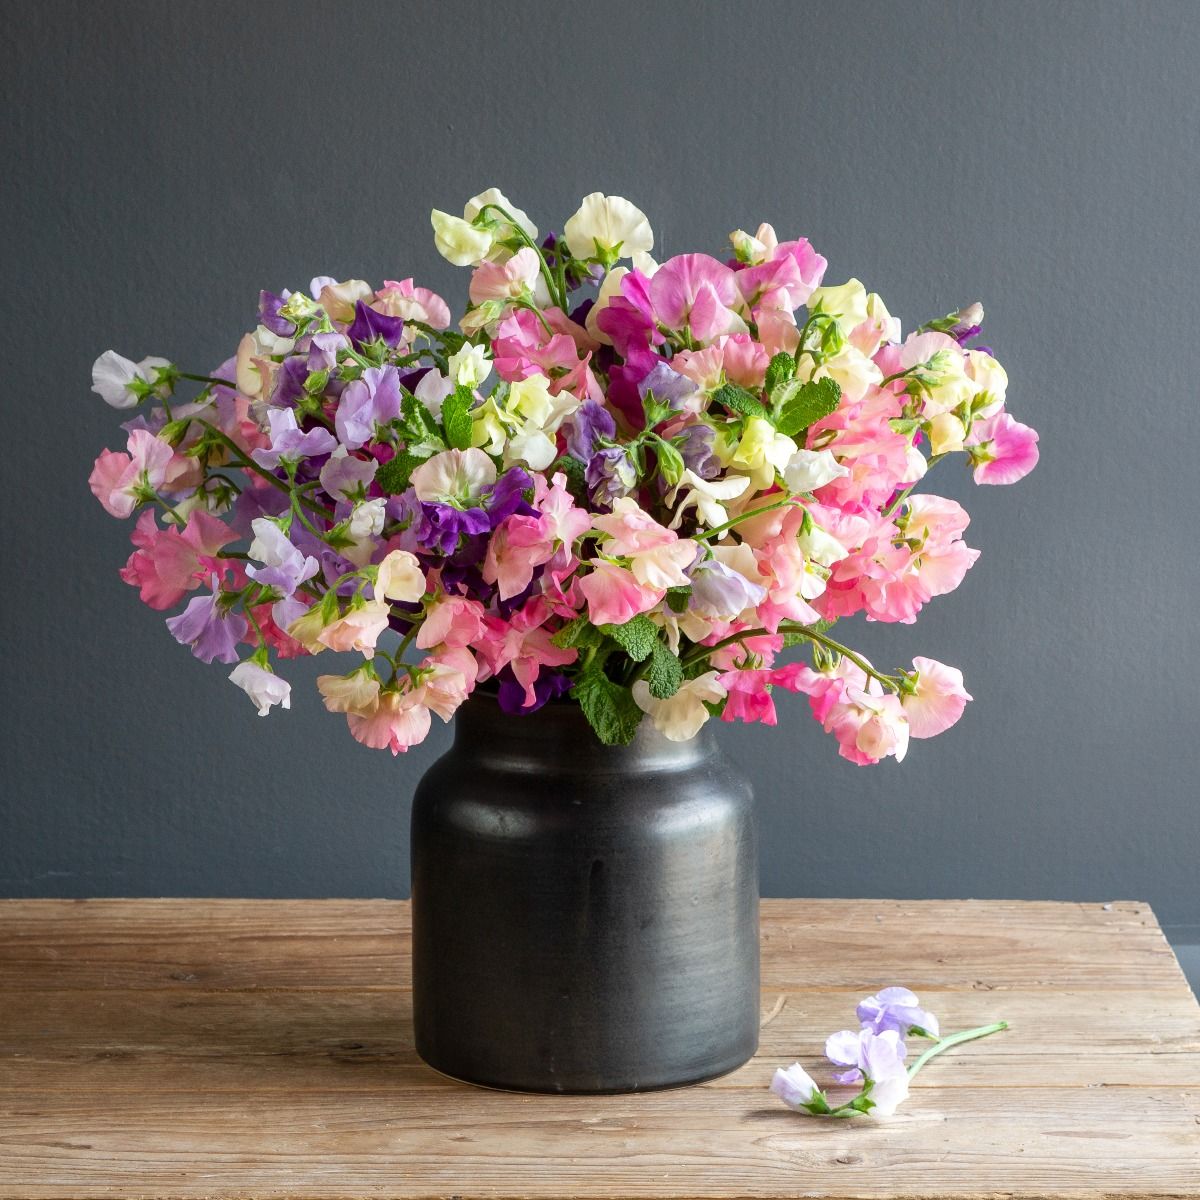 How to Sow Sweet Pea Seeds for Cut Flowers